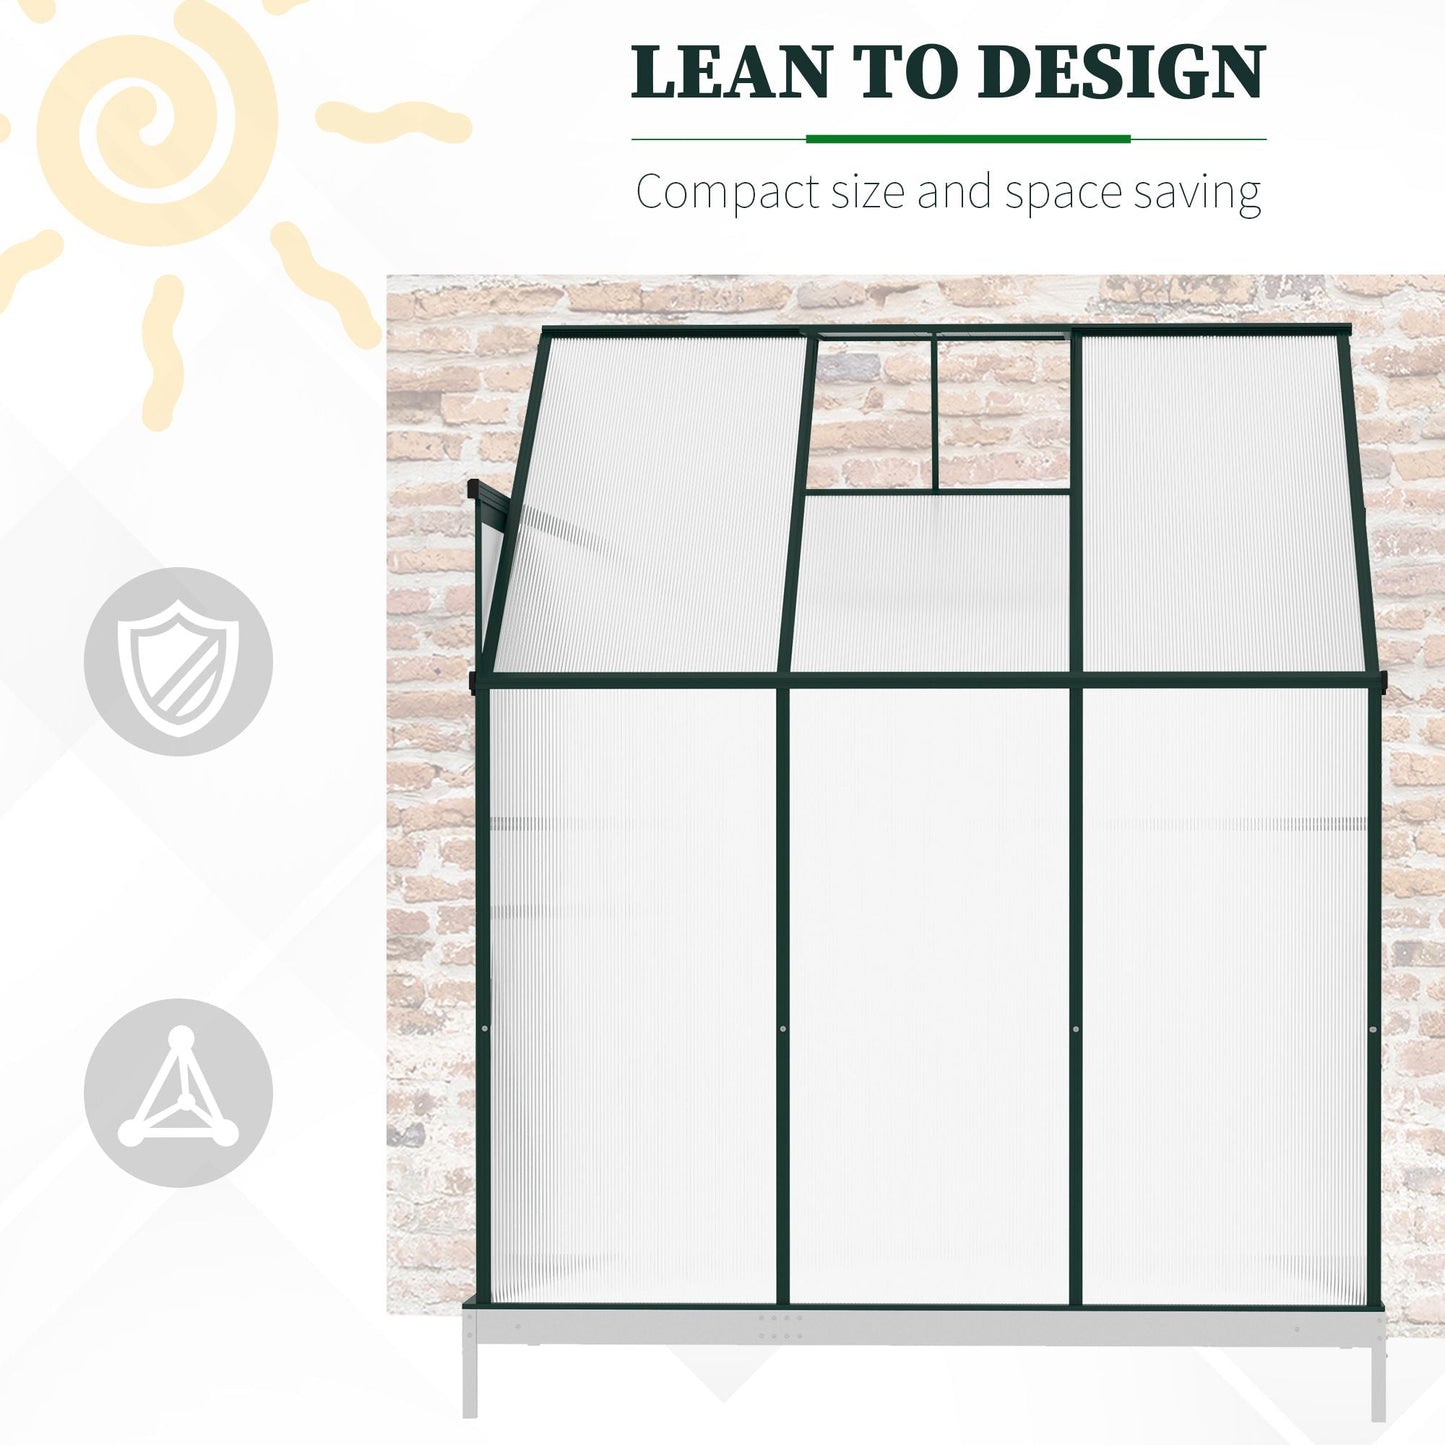 Outdoor and Garden-Walk-In Garden Greenhouse Aluminum Polycarbonate with Roof Vent for Plants Herbs Vegetables 6' x 4' x 7' Green - Outdoor Style Company